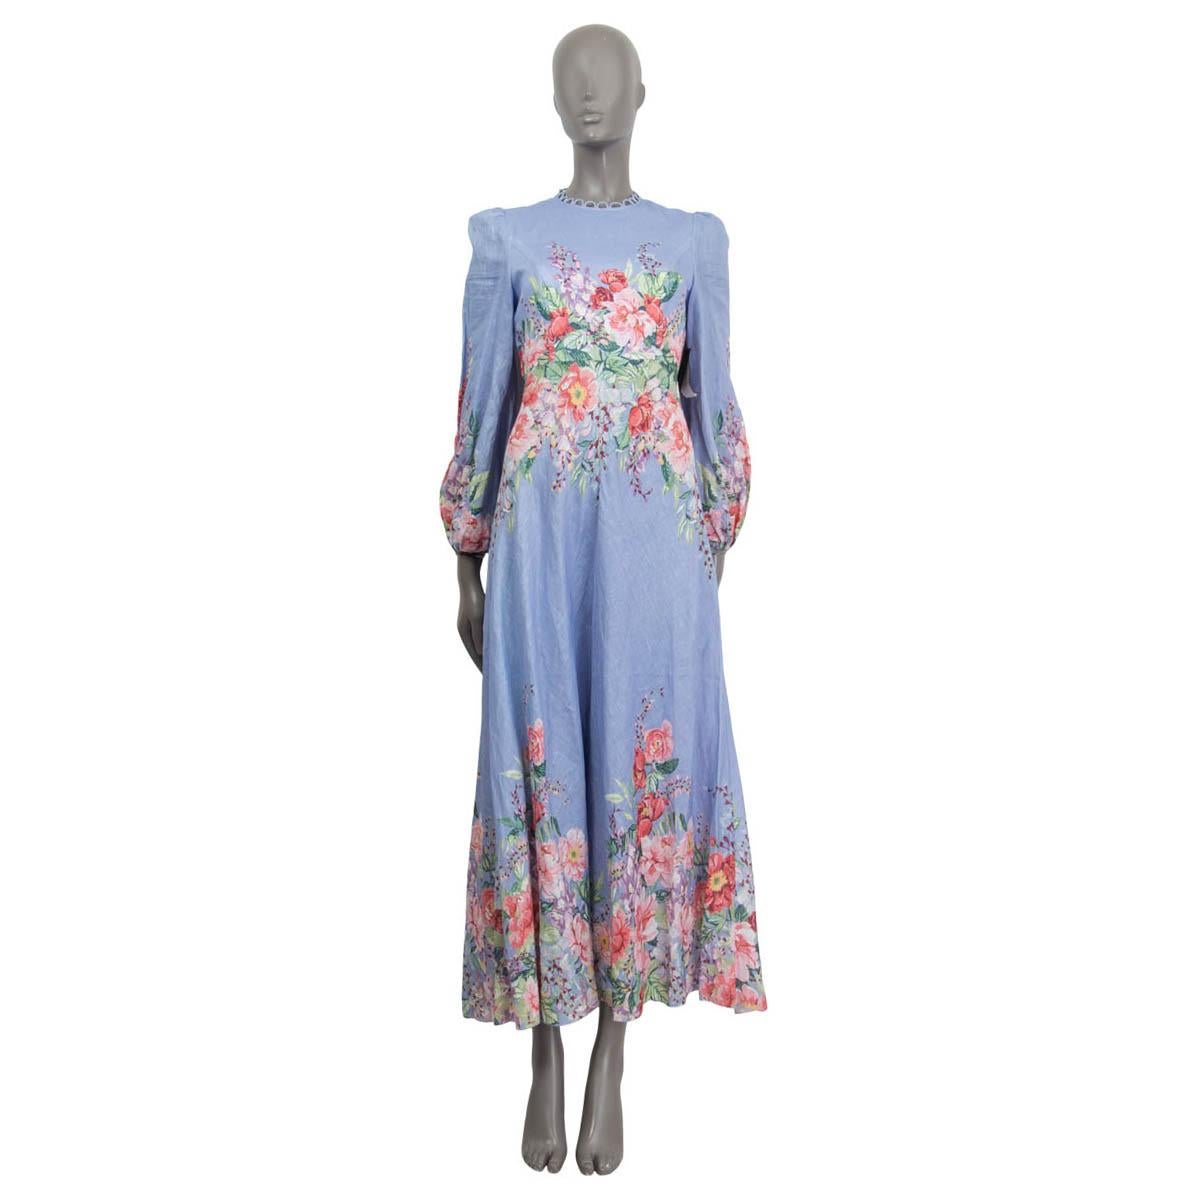 100% authentic Zimmermann 'Bellitude' long sleeve dress in blue linen (100%). Features floral print in pink, rose, green and light green and a high round neck with a curved piping trim. Opens with a concealed zipper on the back. Lined in blue cotton